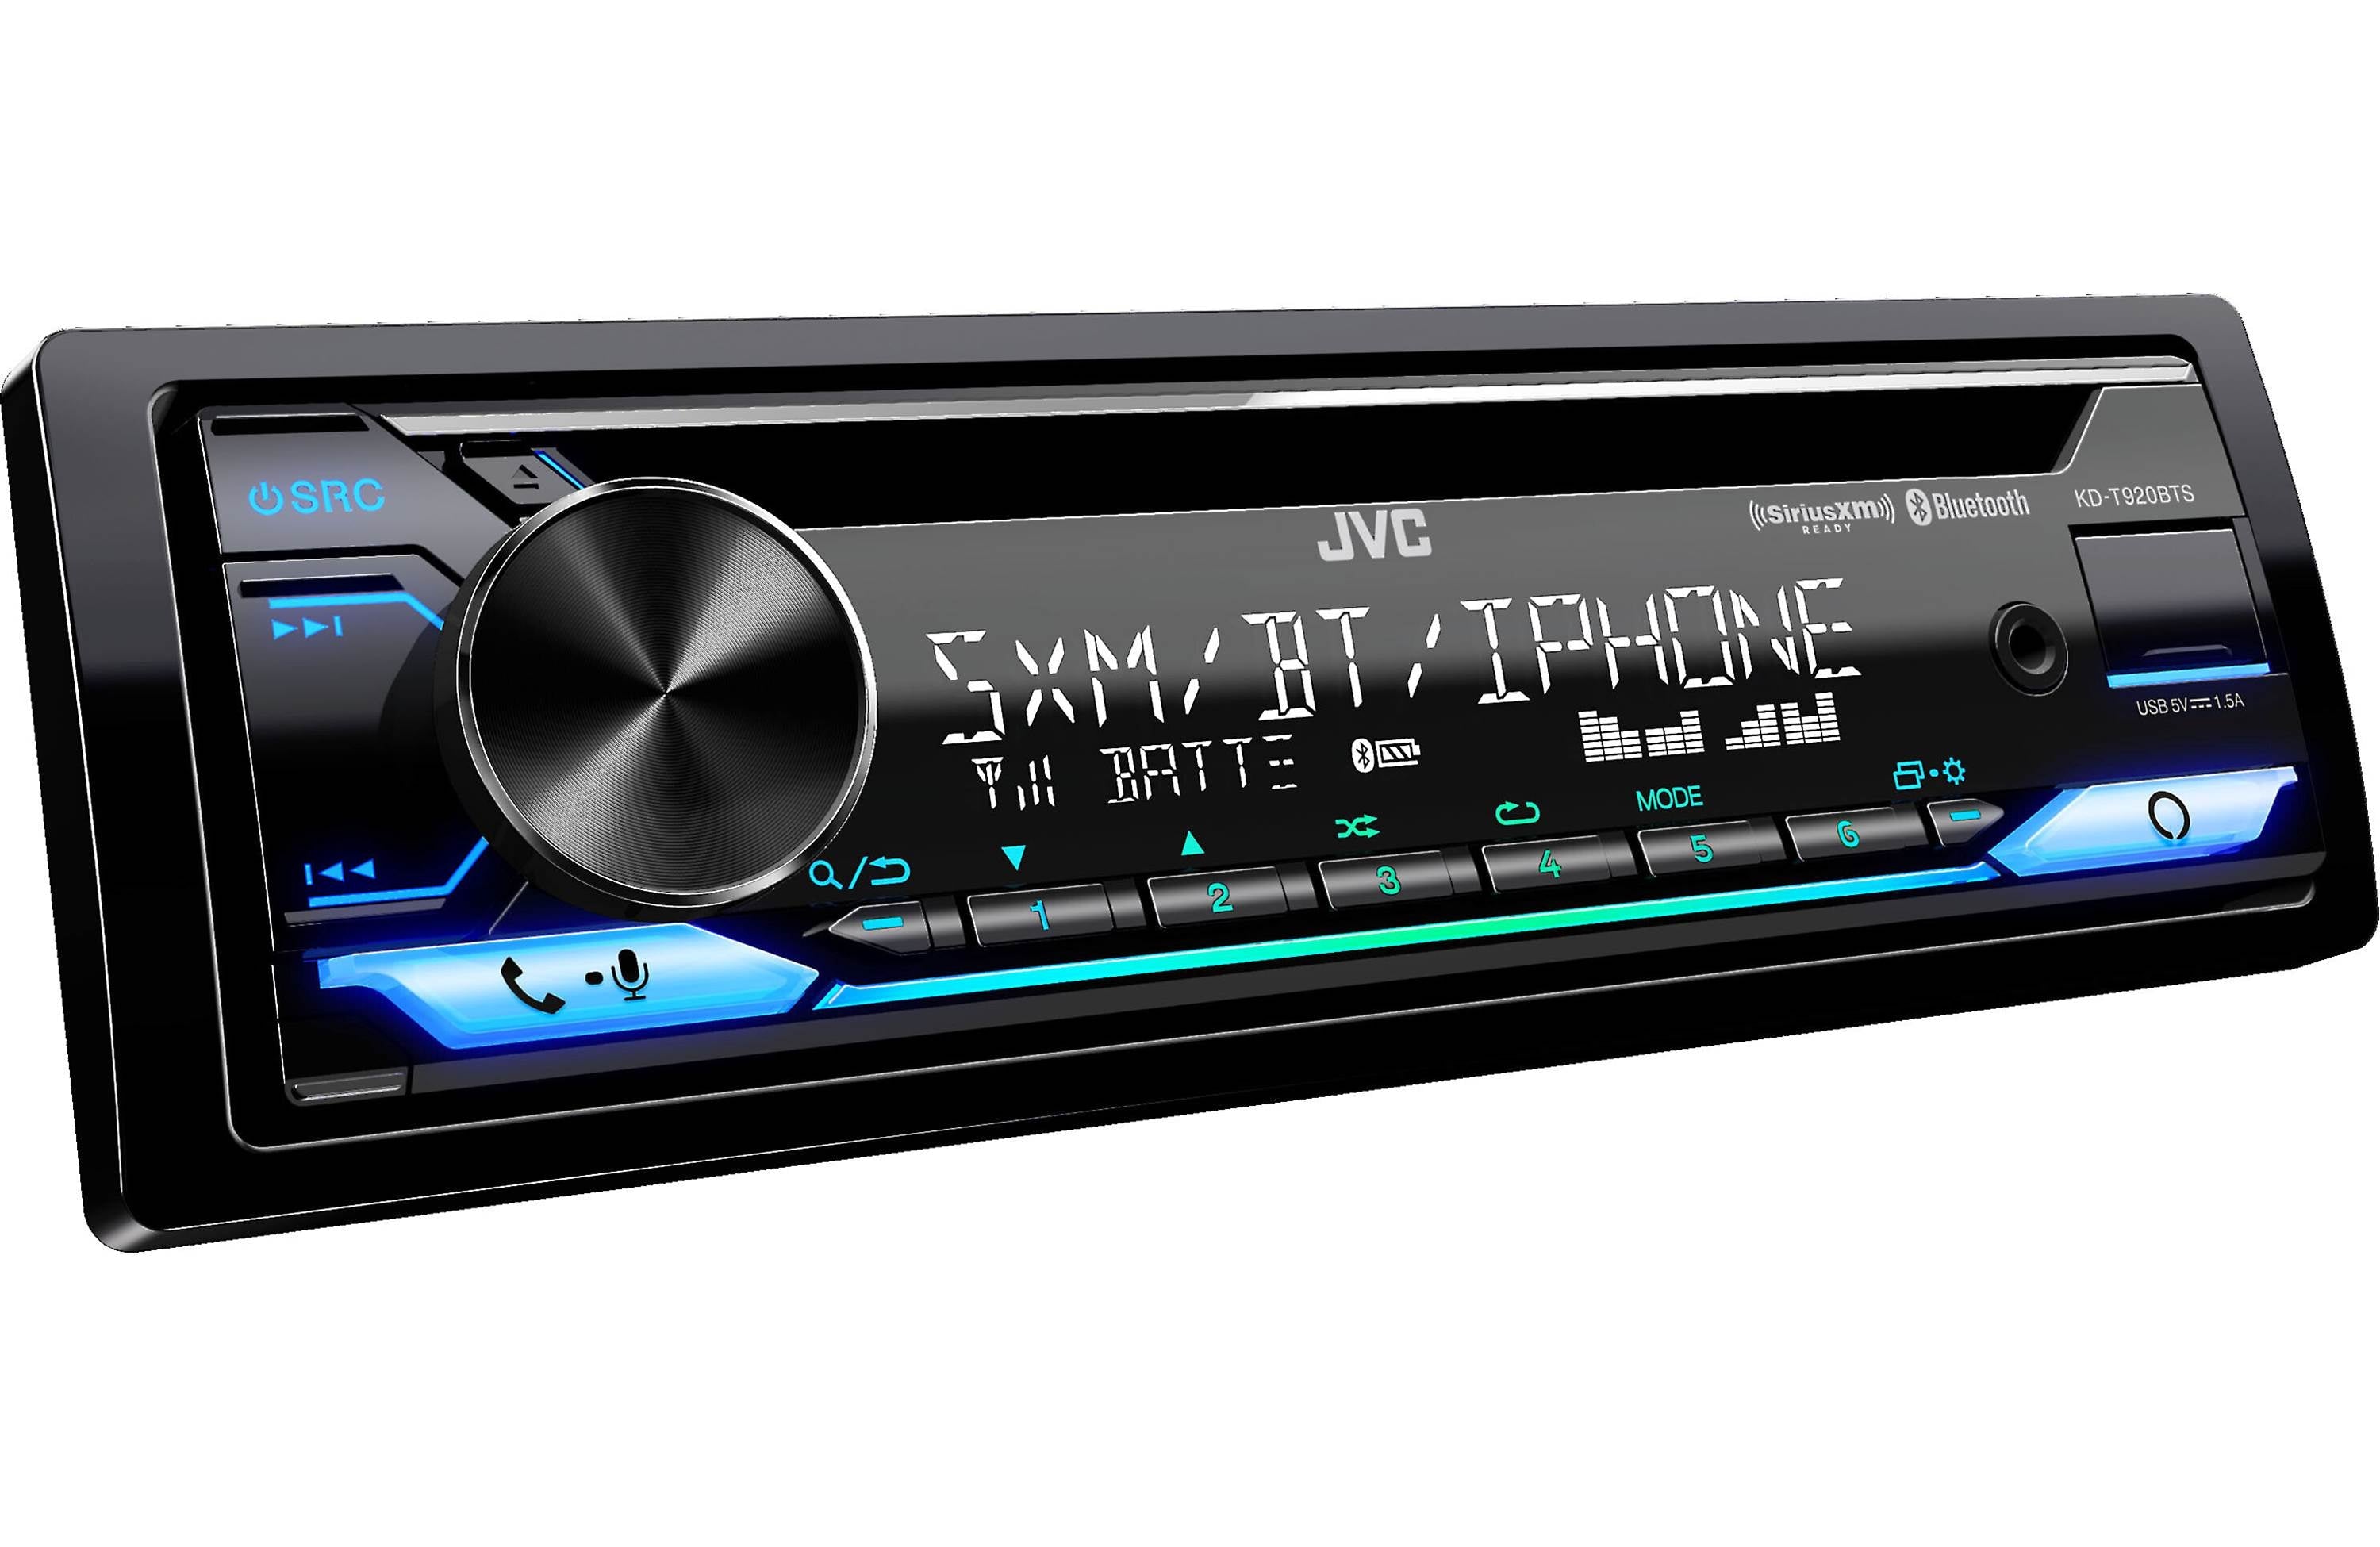 JVC KD-T920BTS CD receiver with AM/FM tuner built-in Bluetooth